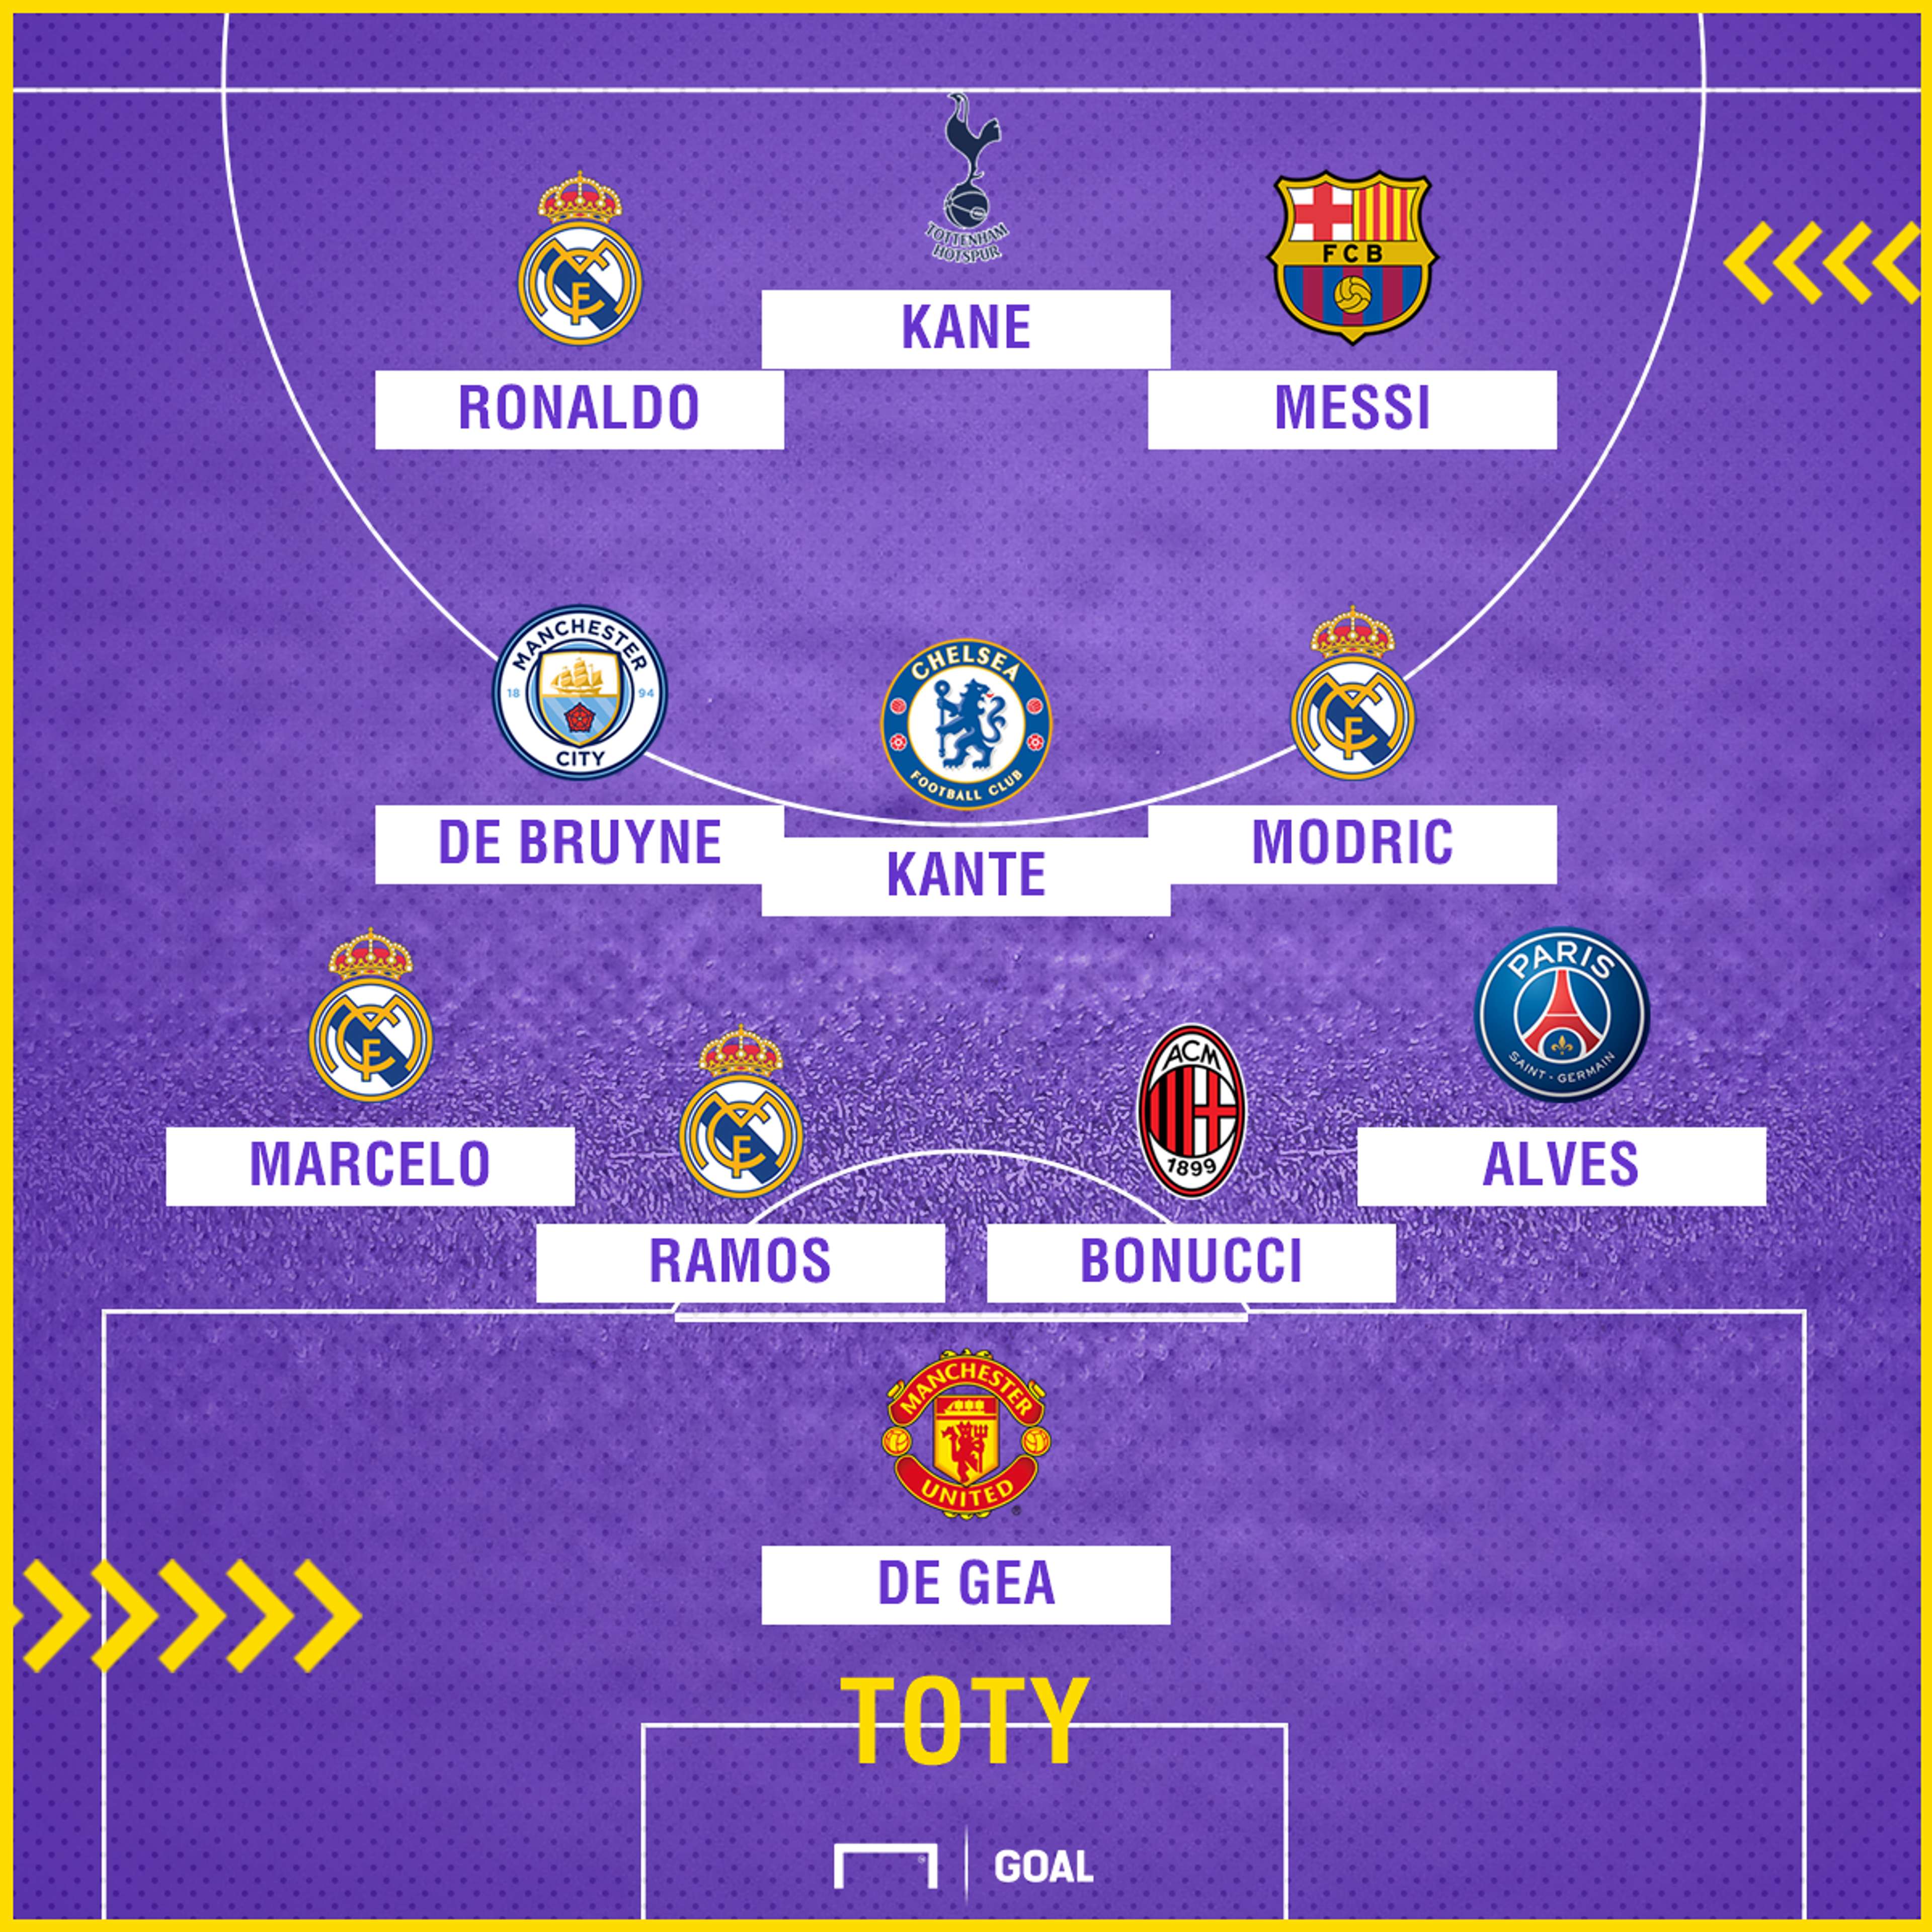 FIFA 18 Team of the Year